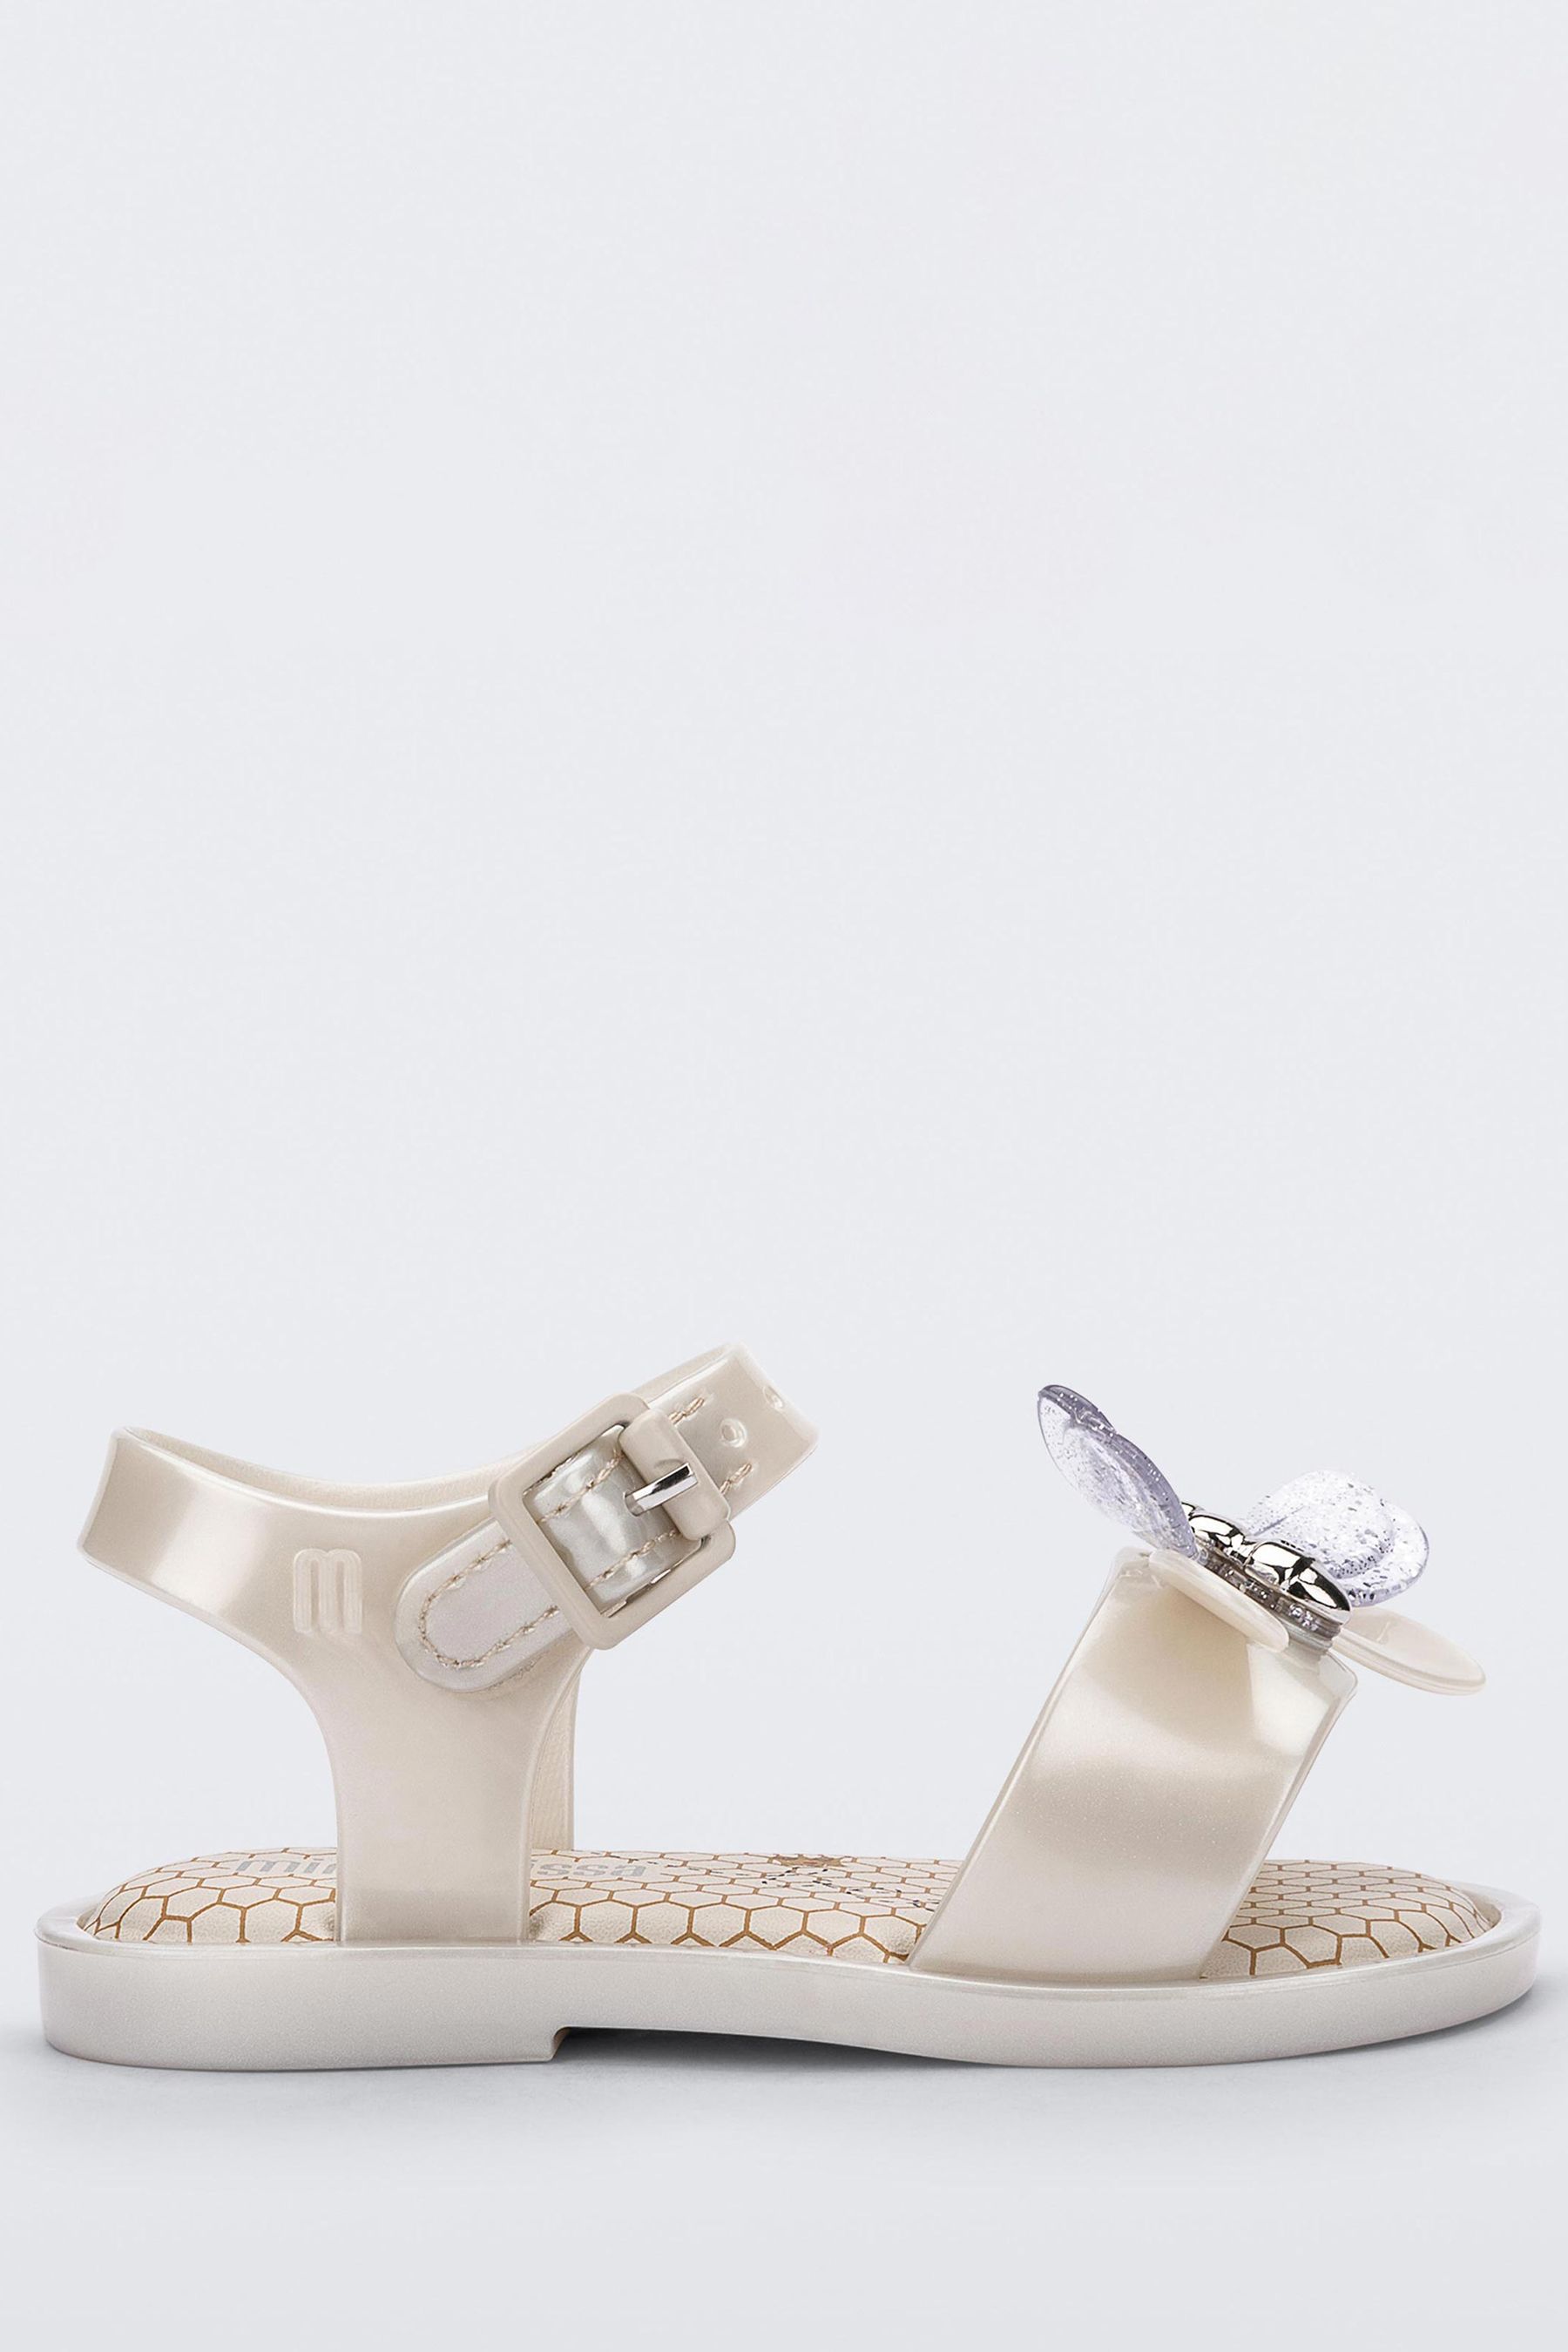 Melissa Mar Sandal Chrome Ad White Sandals Buy Melissa Mar Sandal Chrome  Ad White Sandals Online at Best Price in India  Nykaa